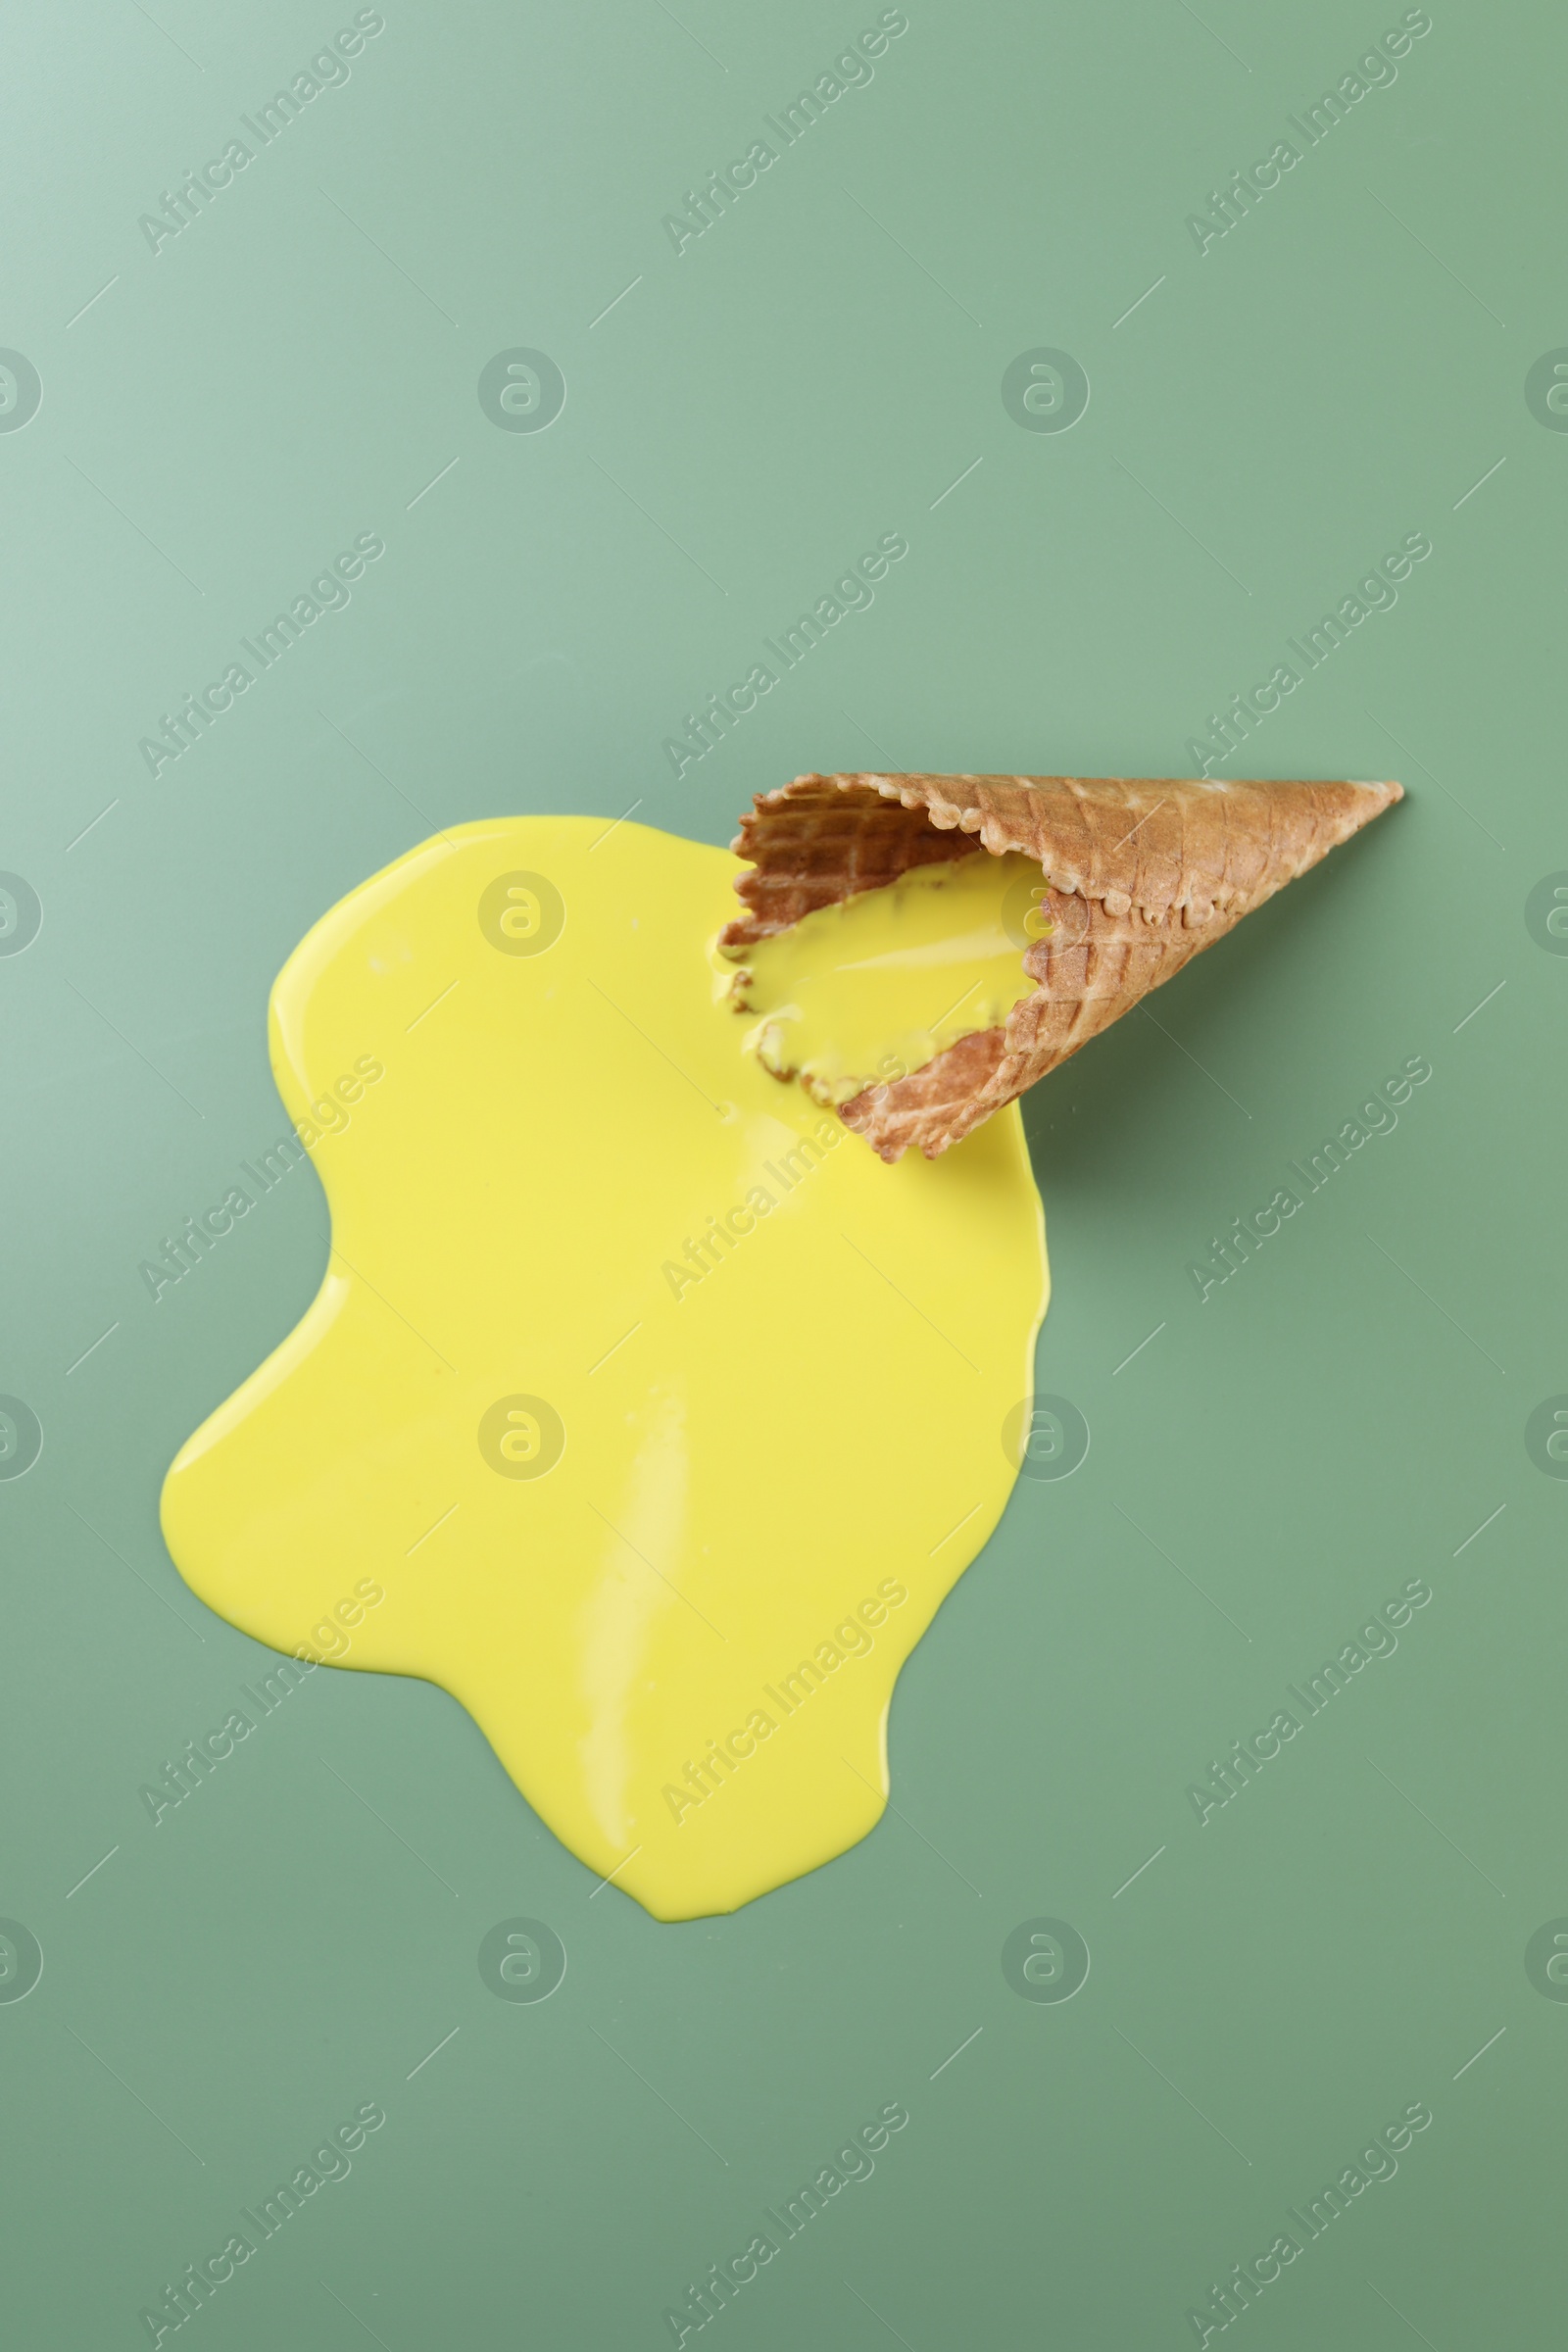 Photo of Melted ice cream and wafer cone on green background, above view